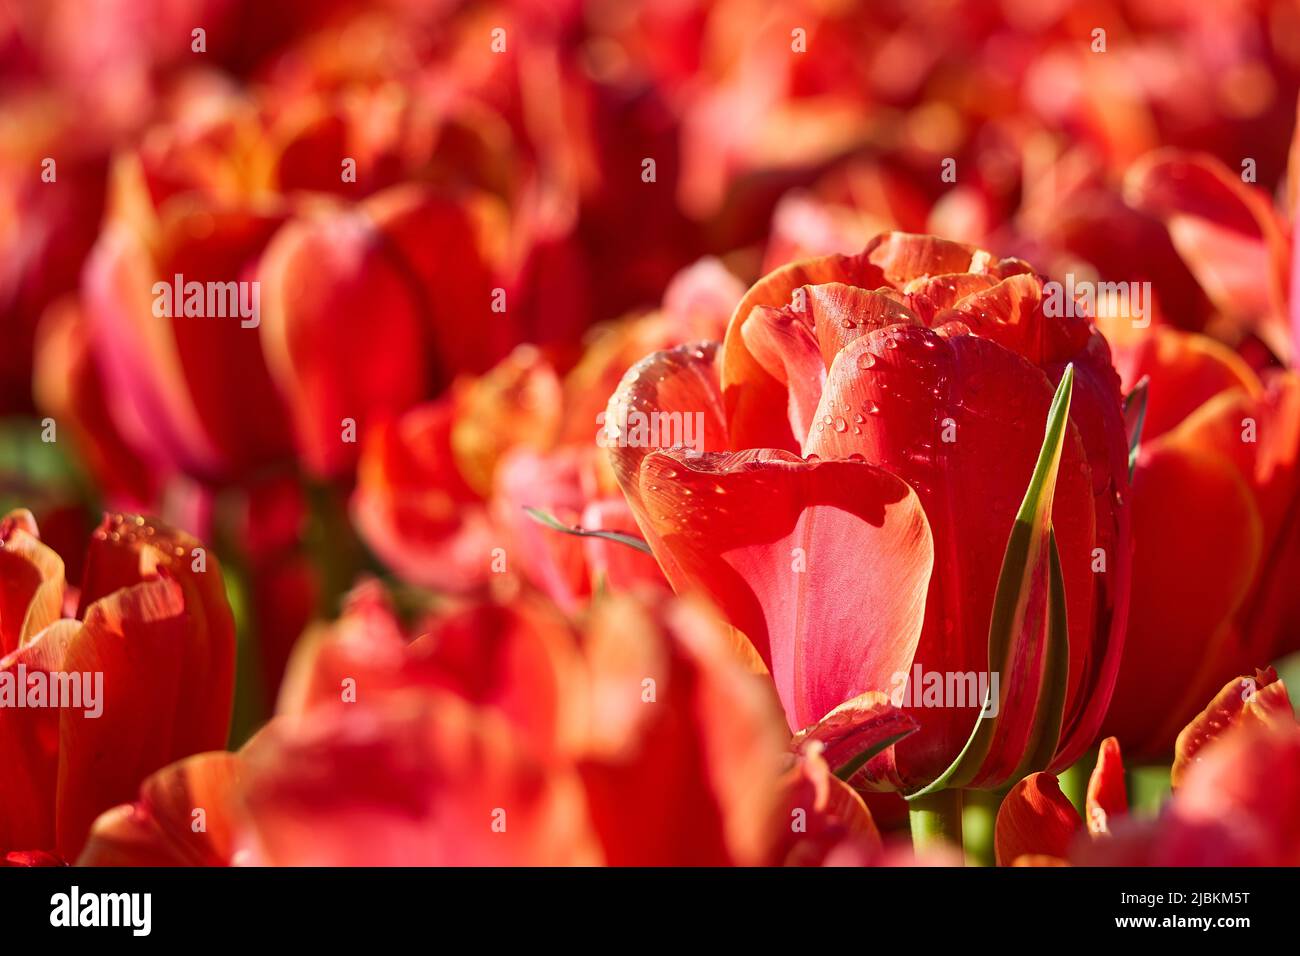 Red adnd yellow tulips with dew drops in the sun light Stock Photo